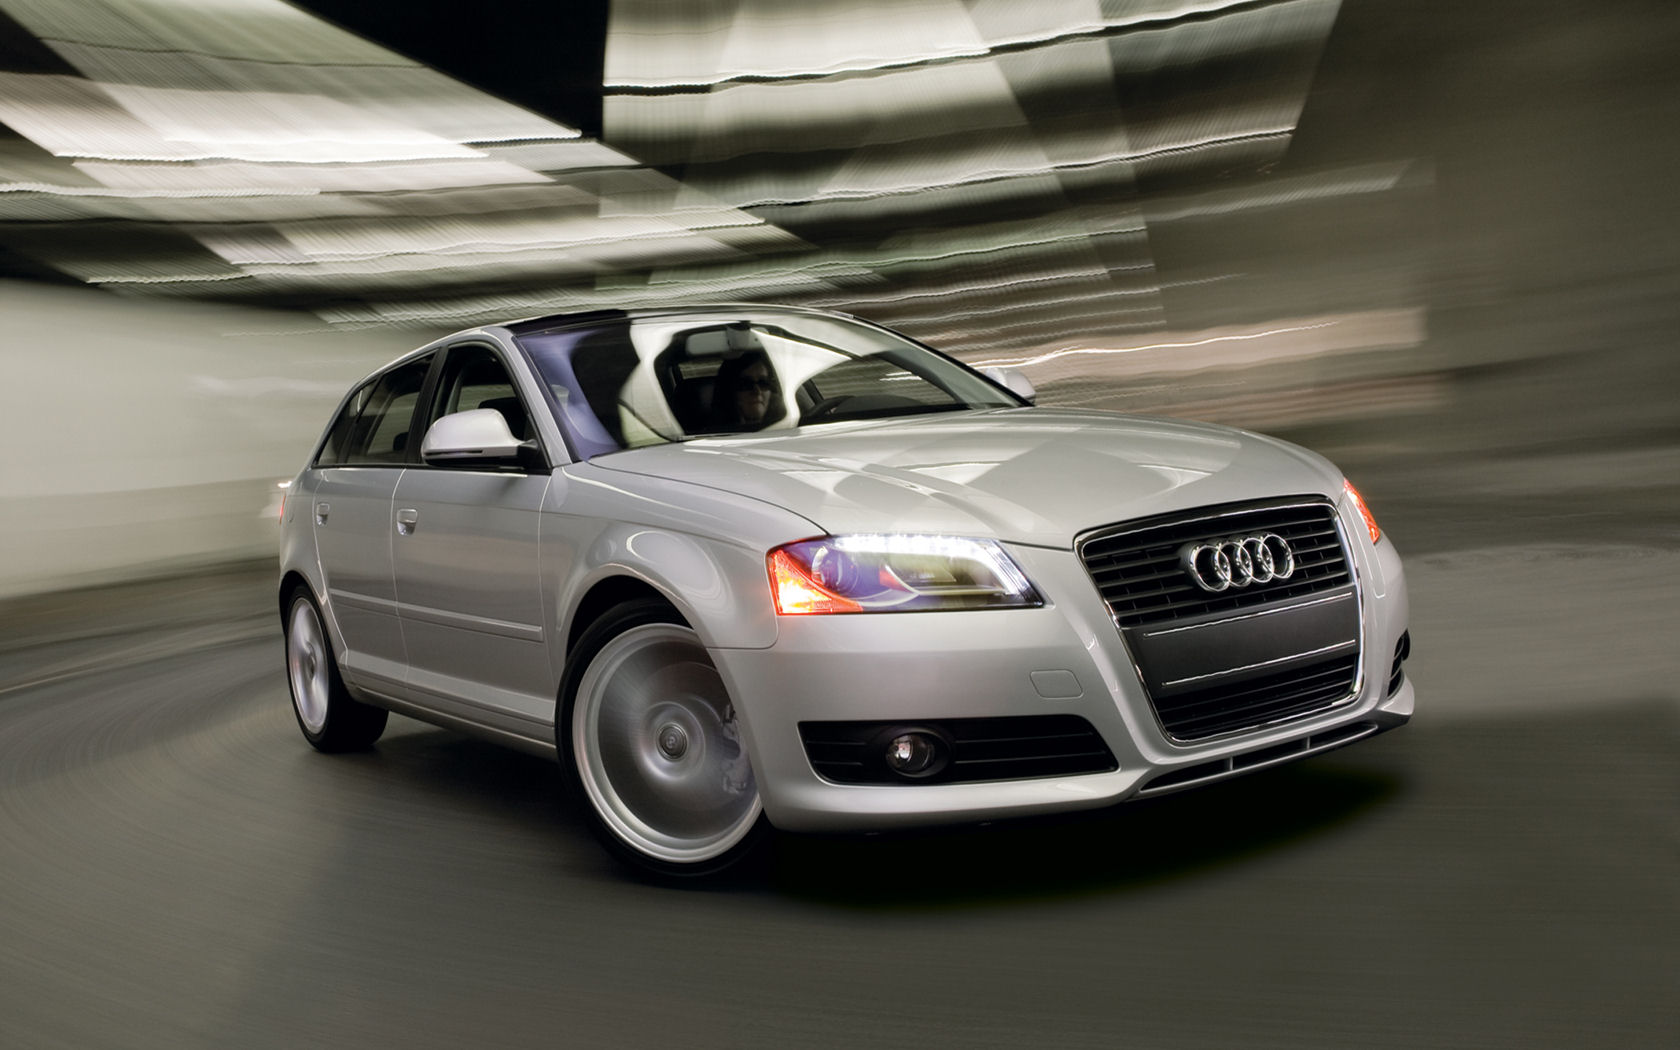 Awesome Audi A3 Wallpaper Full HD Pictures